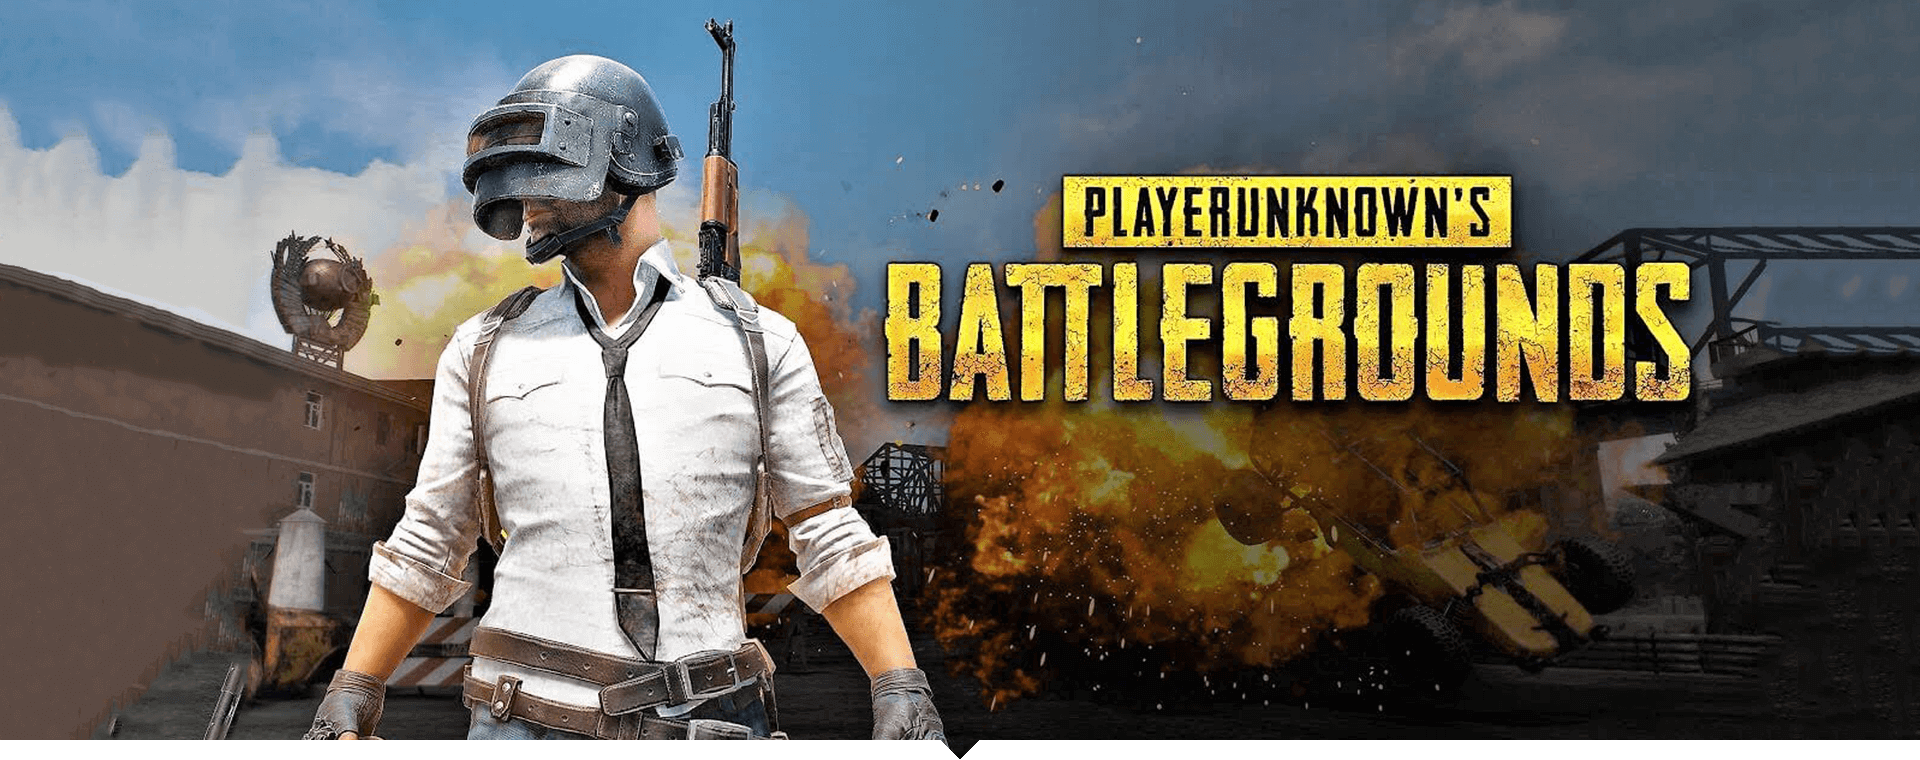 mobile pubg game download for pc